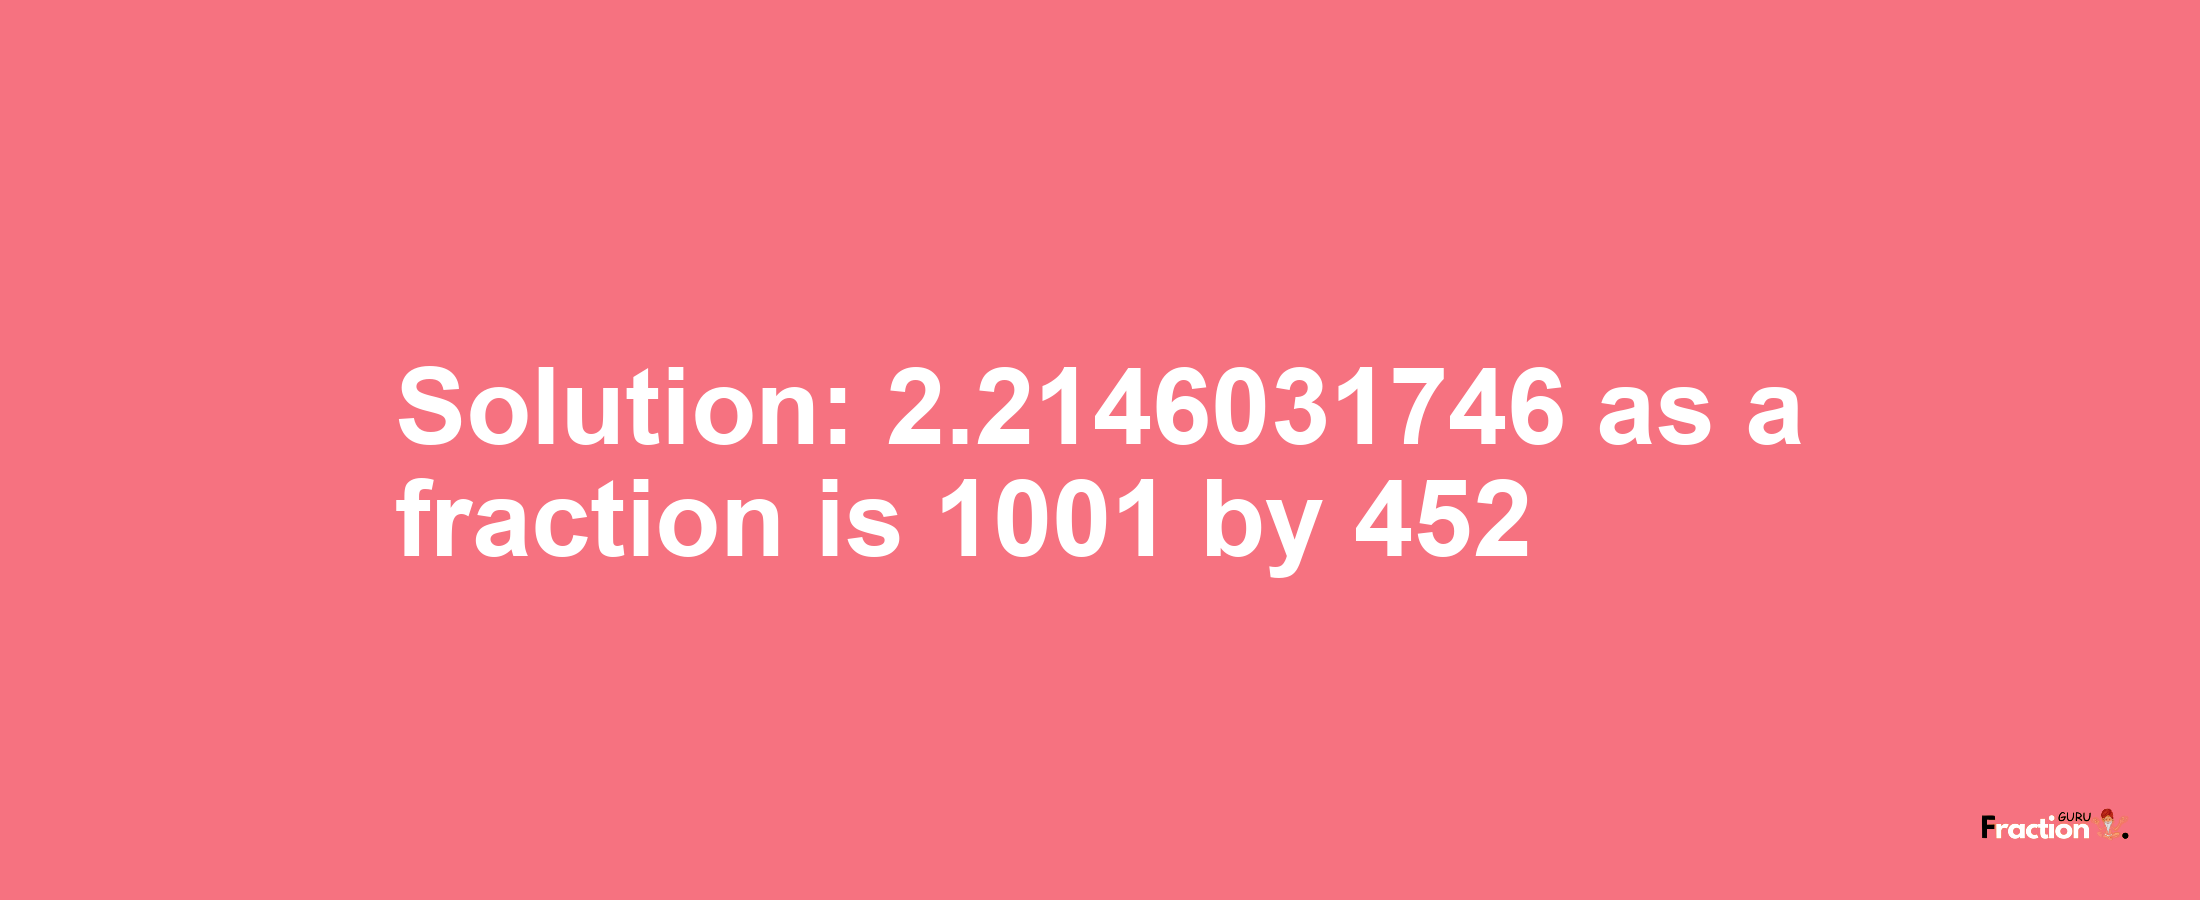 Solution:2.2146031746 as a fraction is 1001/452